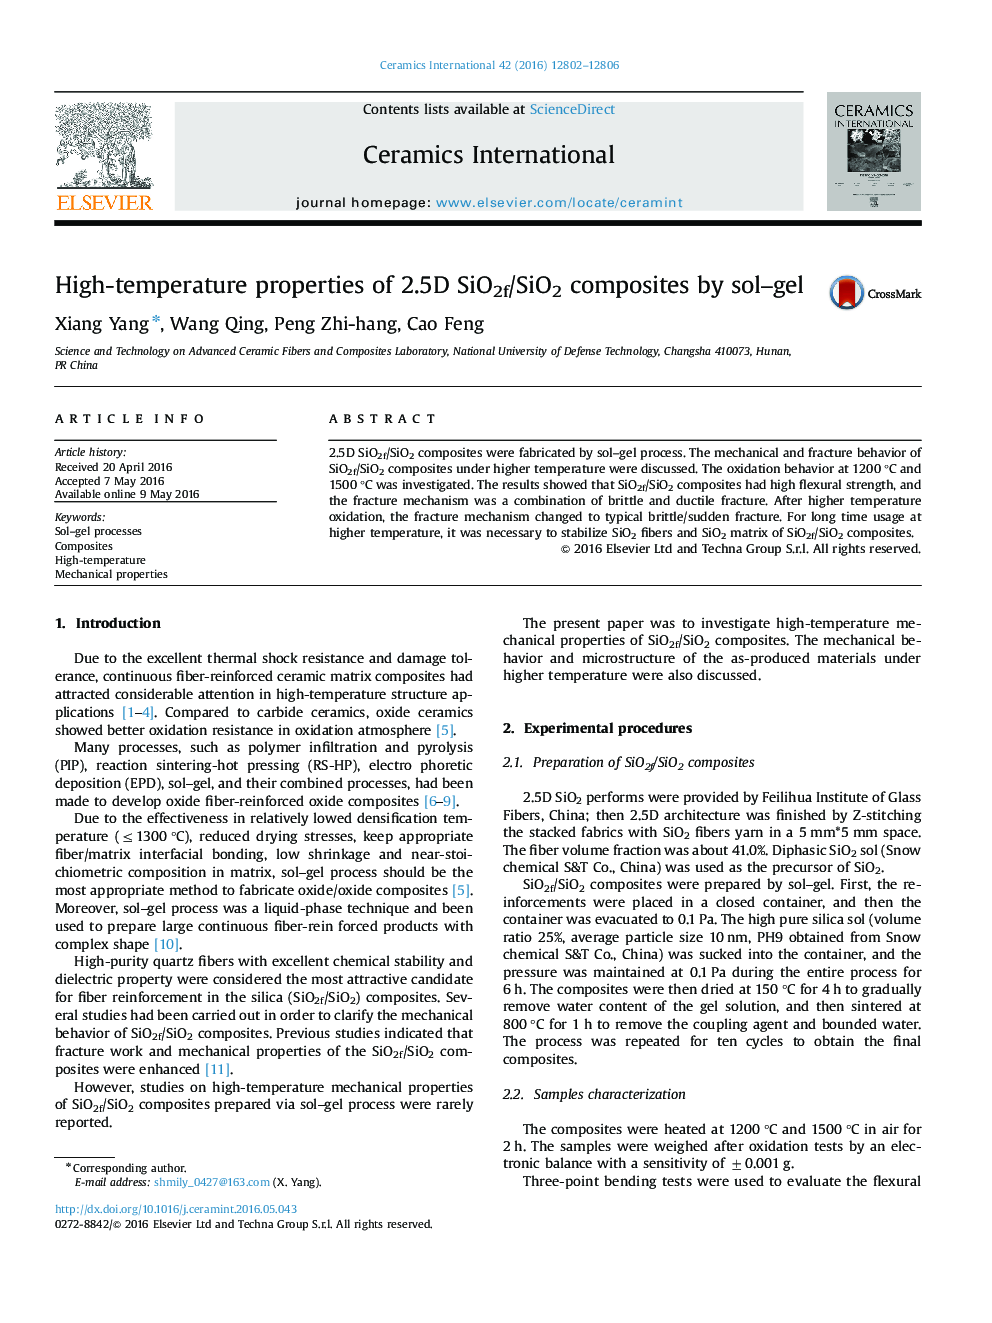 High-temperature properties of 2.5D SiO2f/SiO2 composites by sol–gel